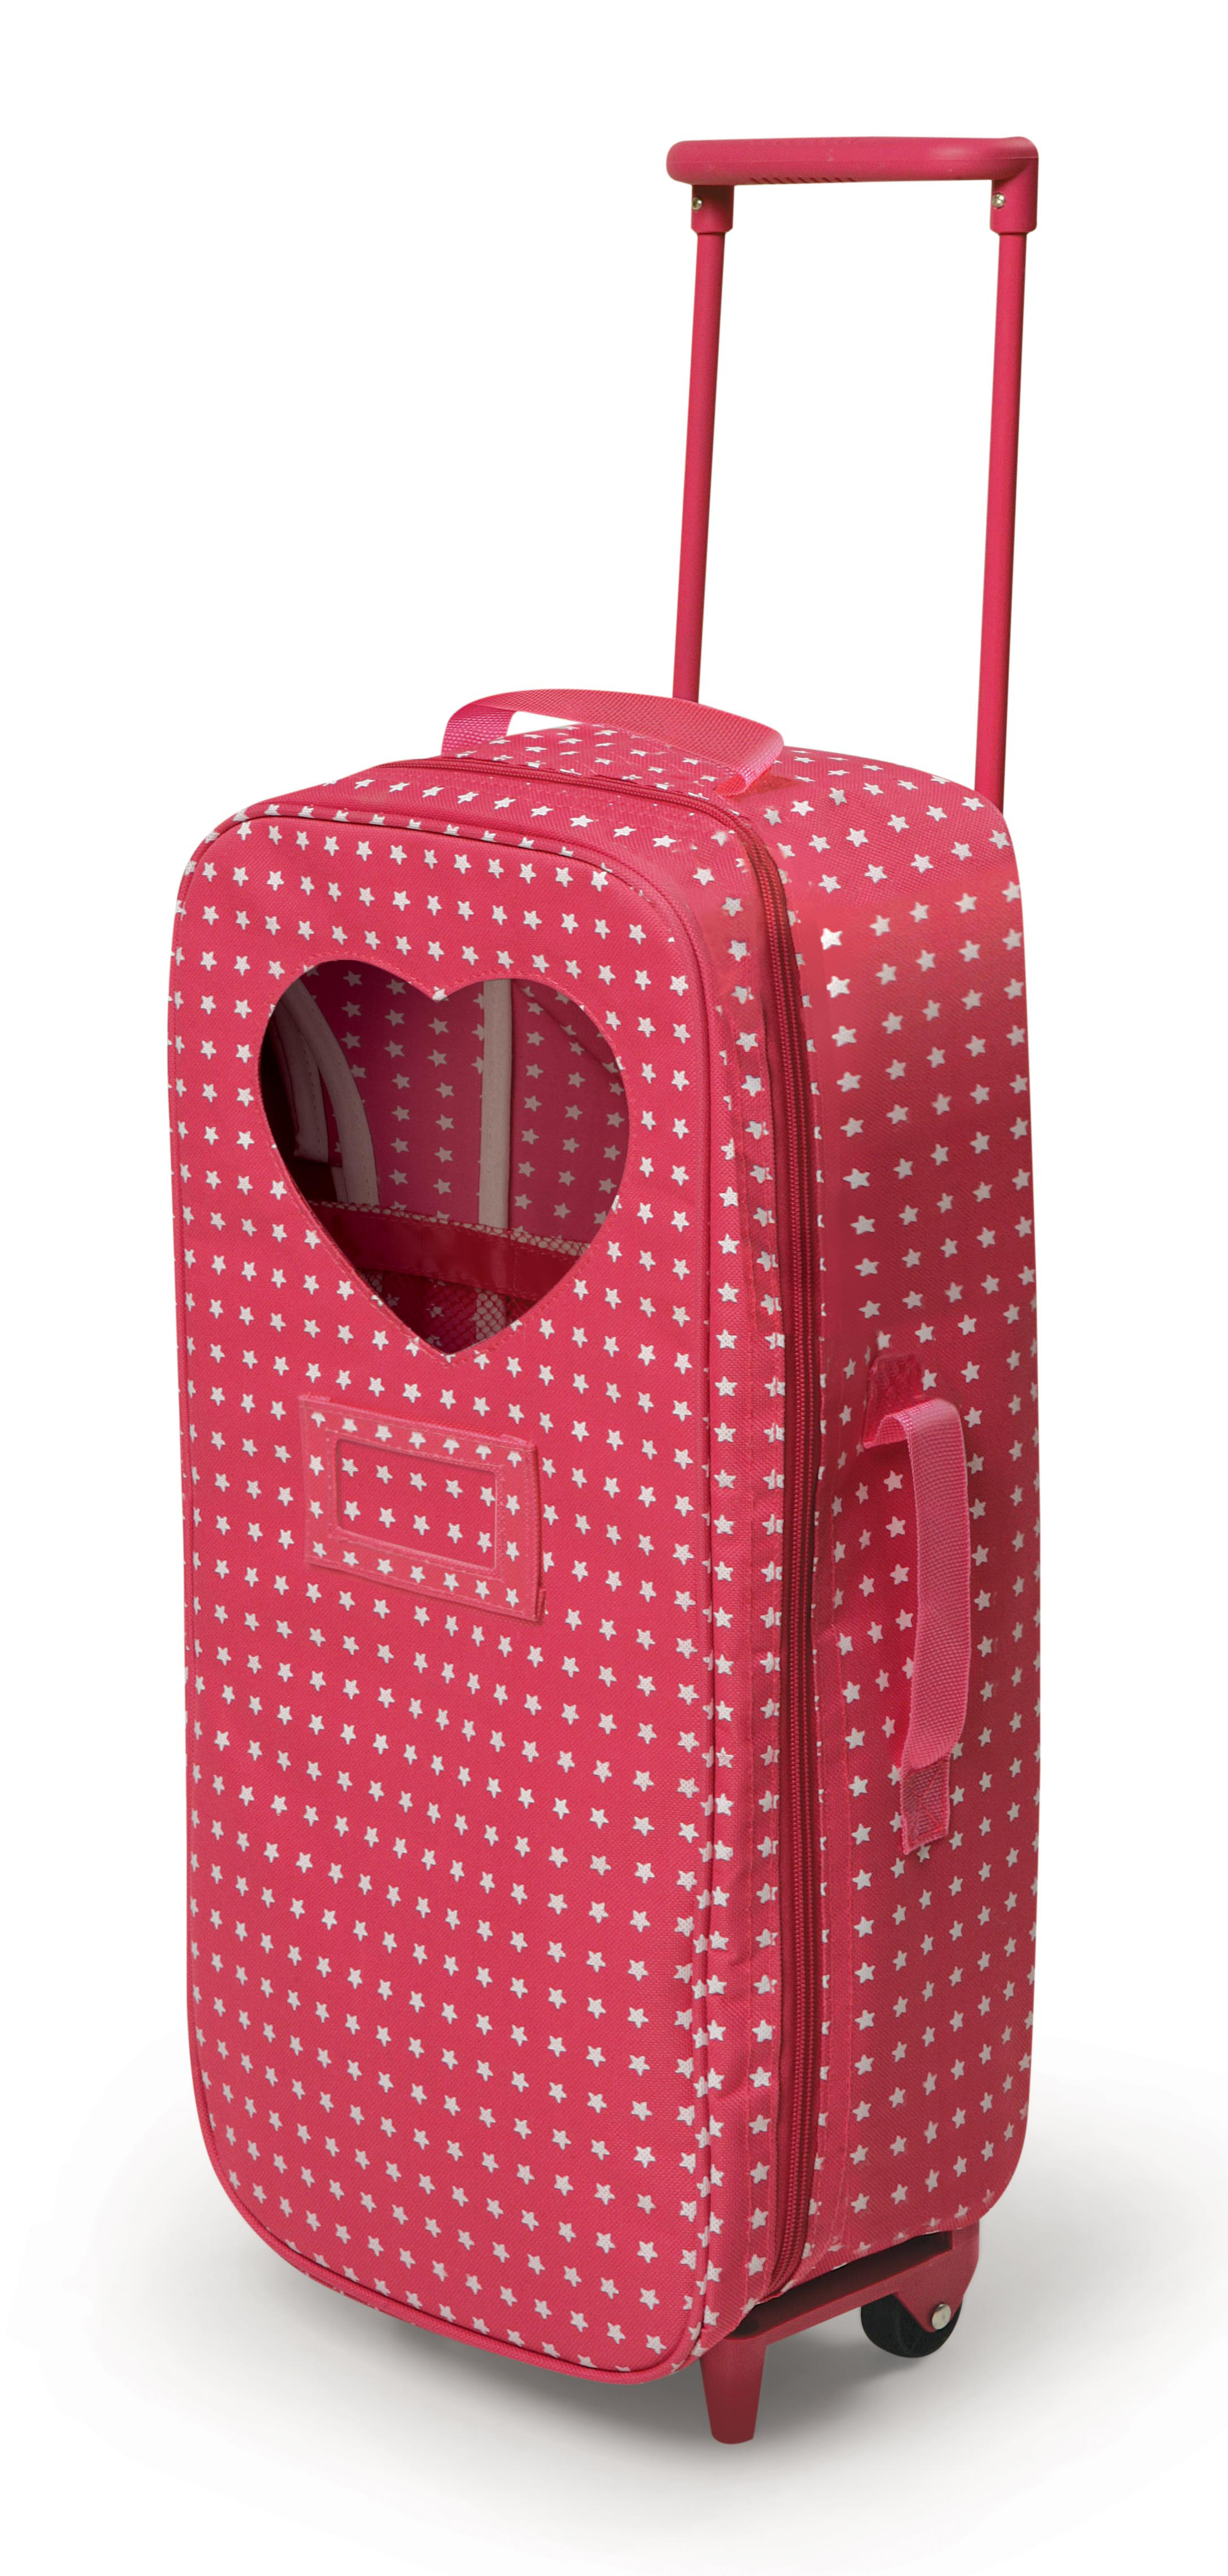 Trolley Doll Carrier with Rocking Bed and Bedding - Pink/Star